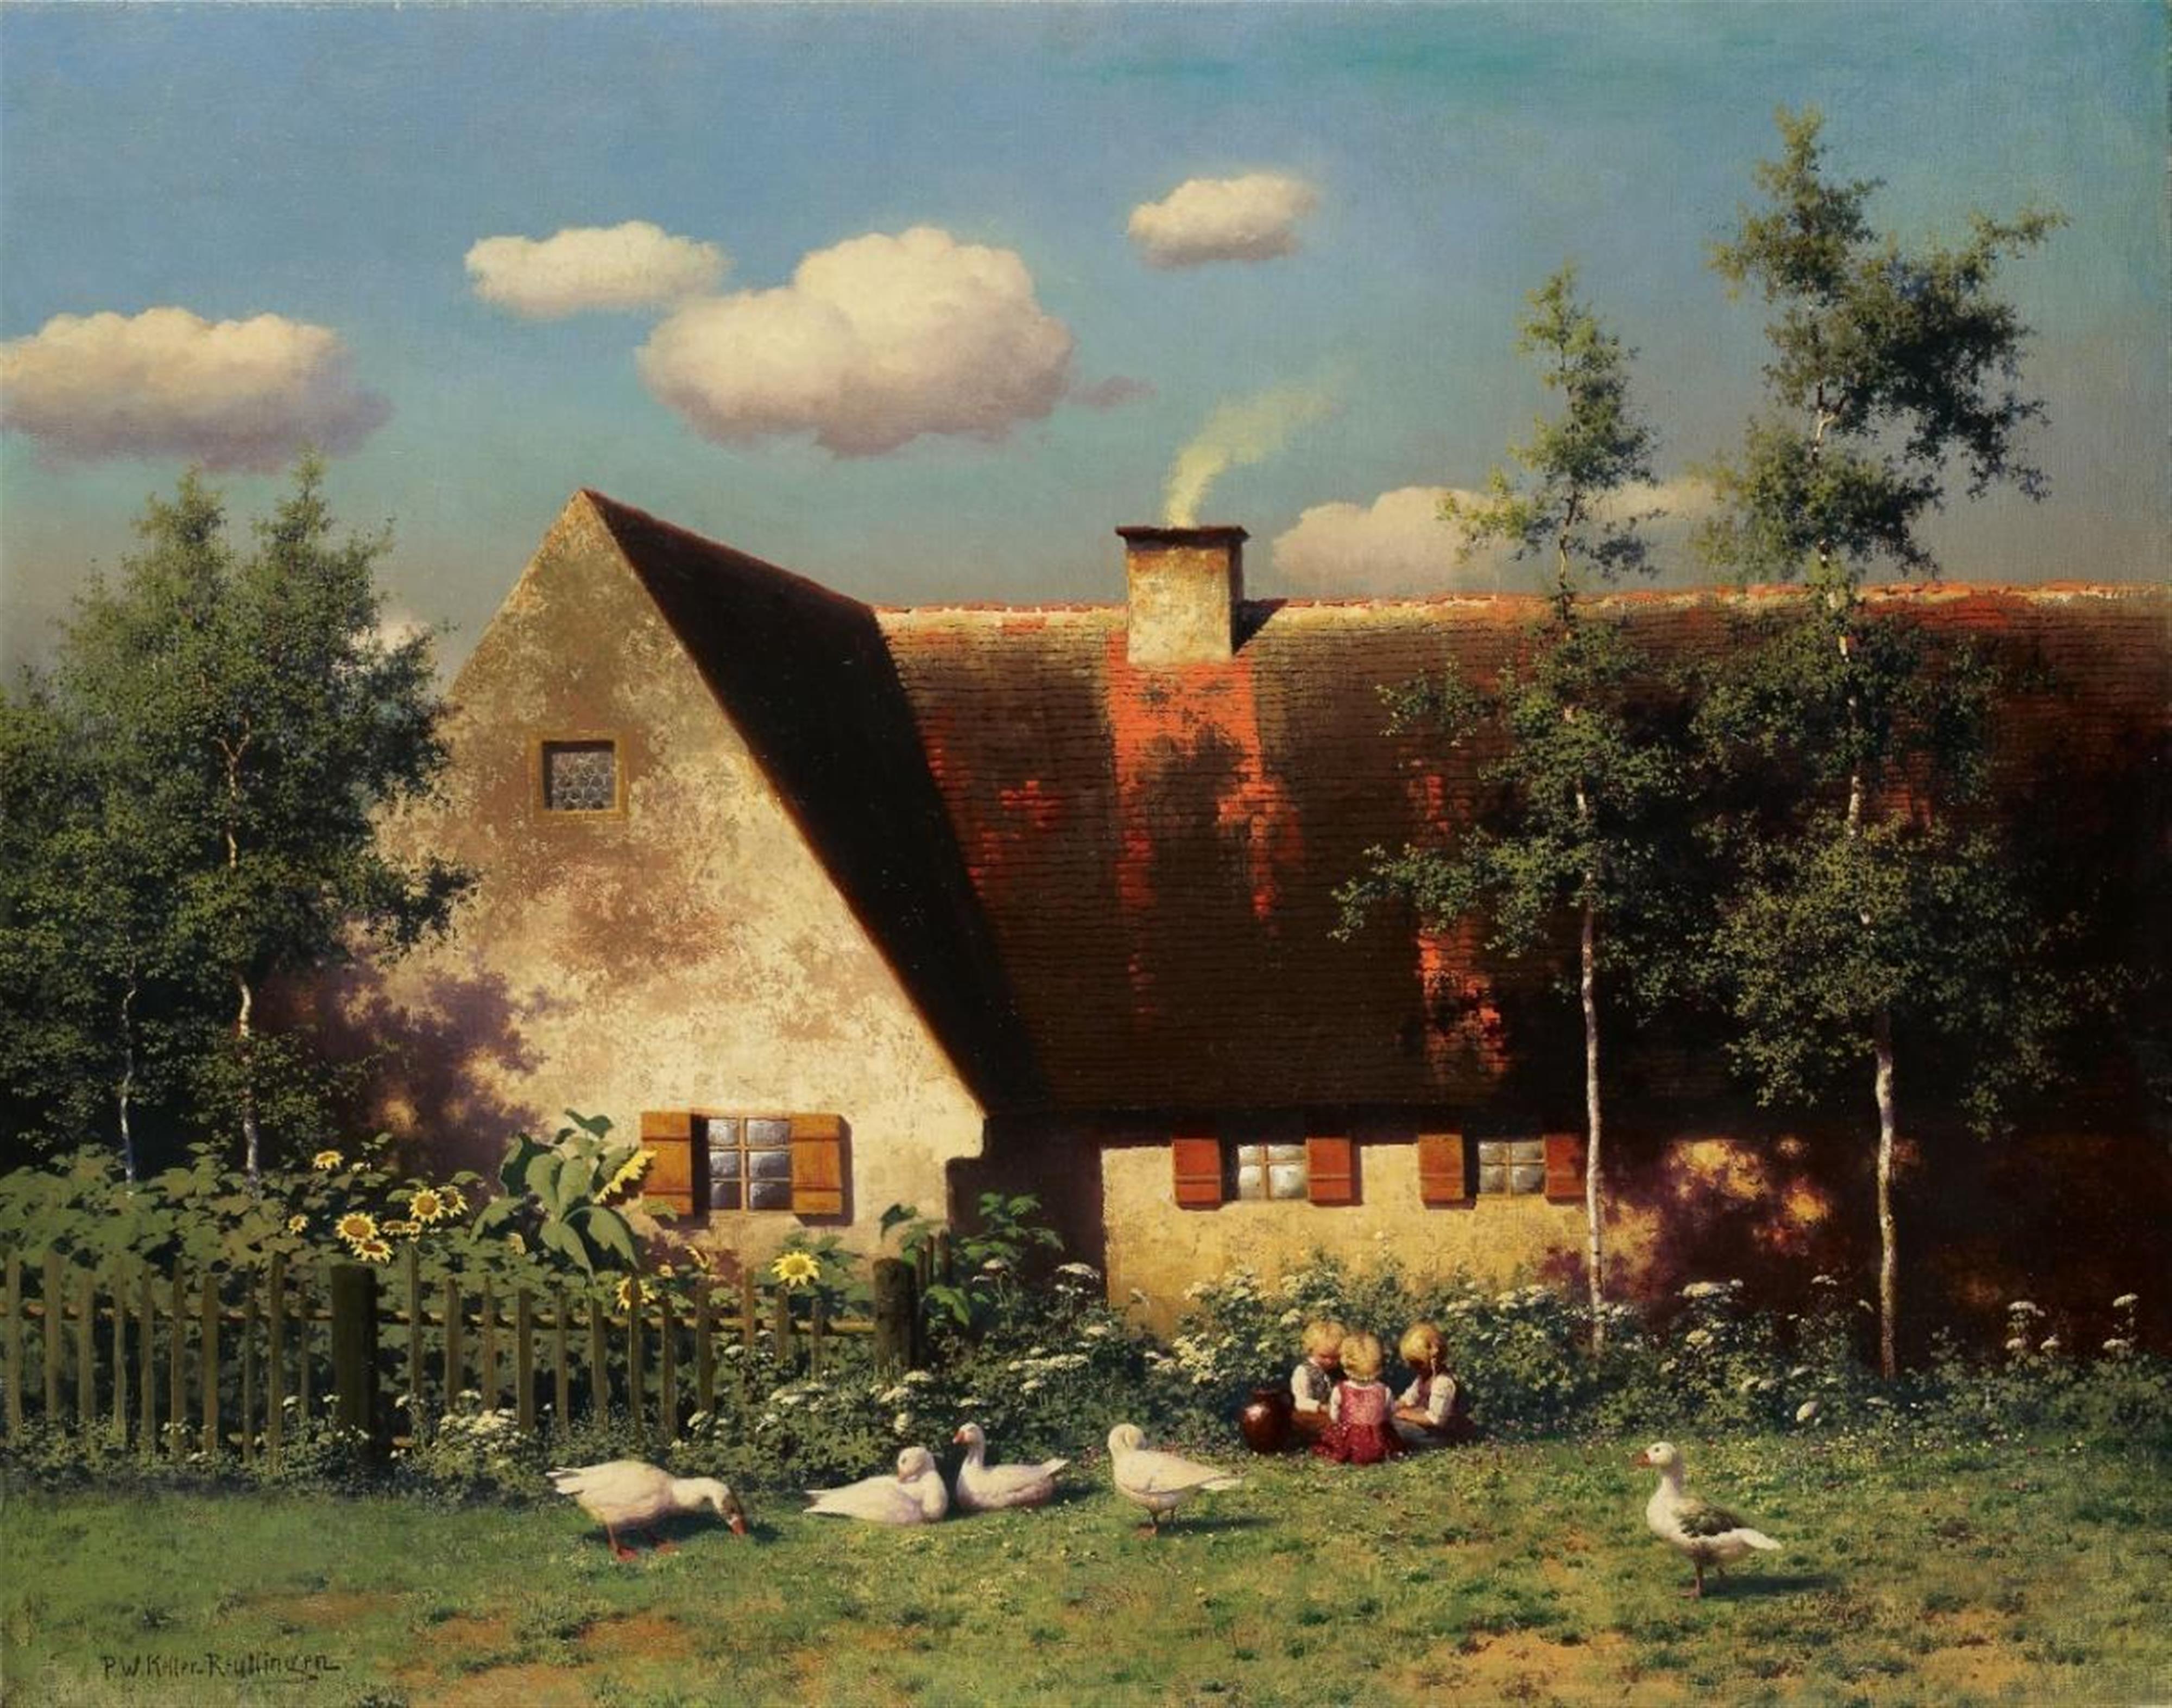 Paul Wilhelm Keller-Reutlingen - PLAYING CHILDREN WITH GEESE IN FRONT OF A FARMHOUSE - image-1